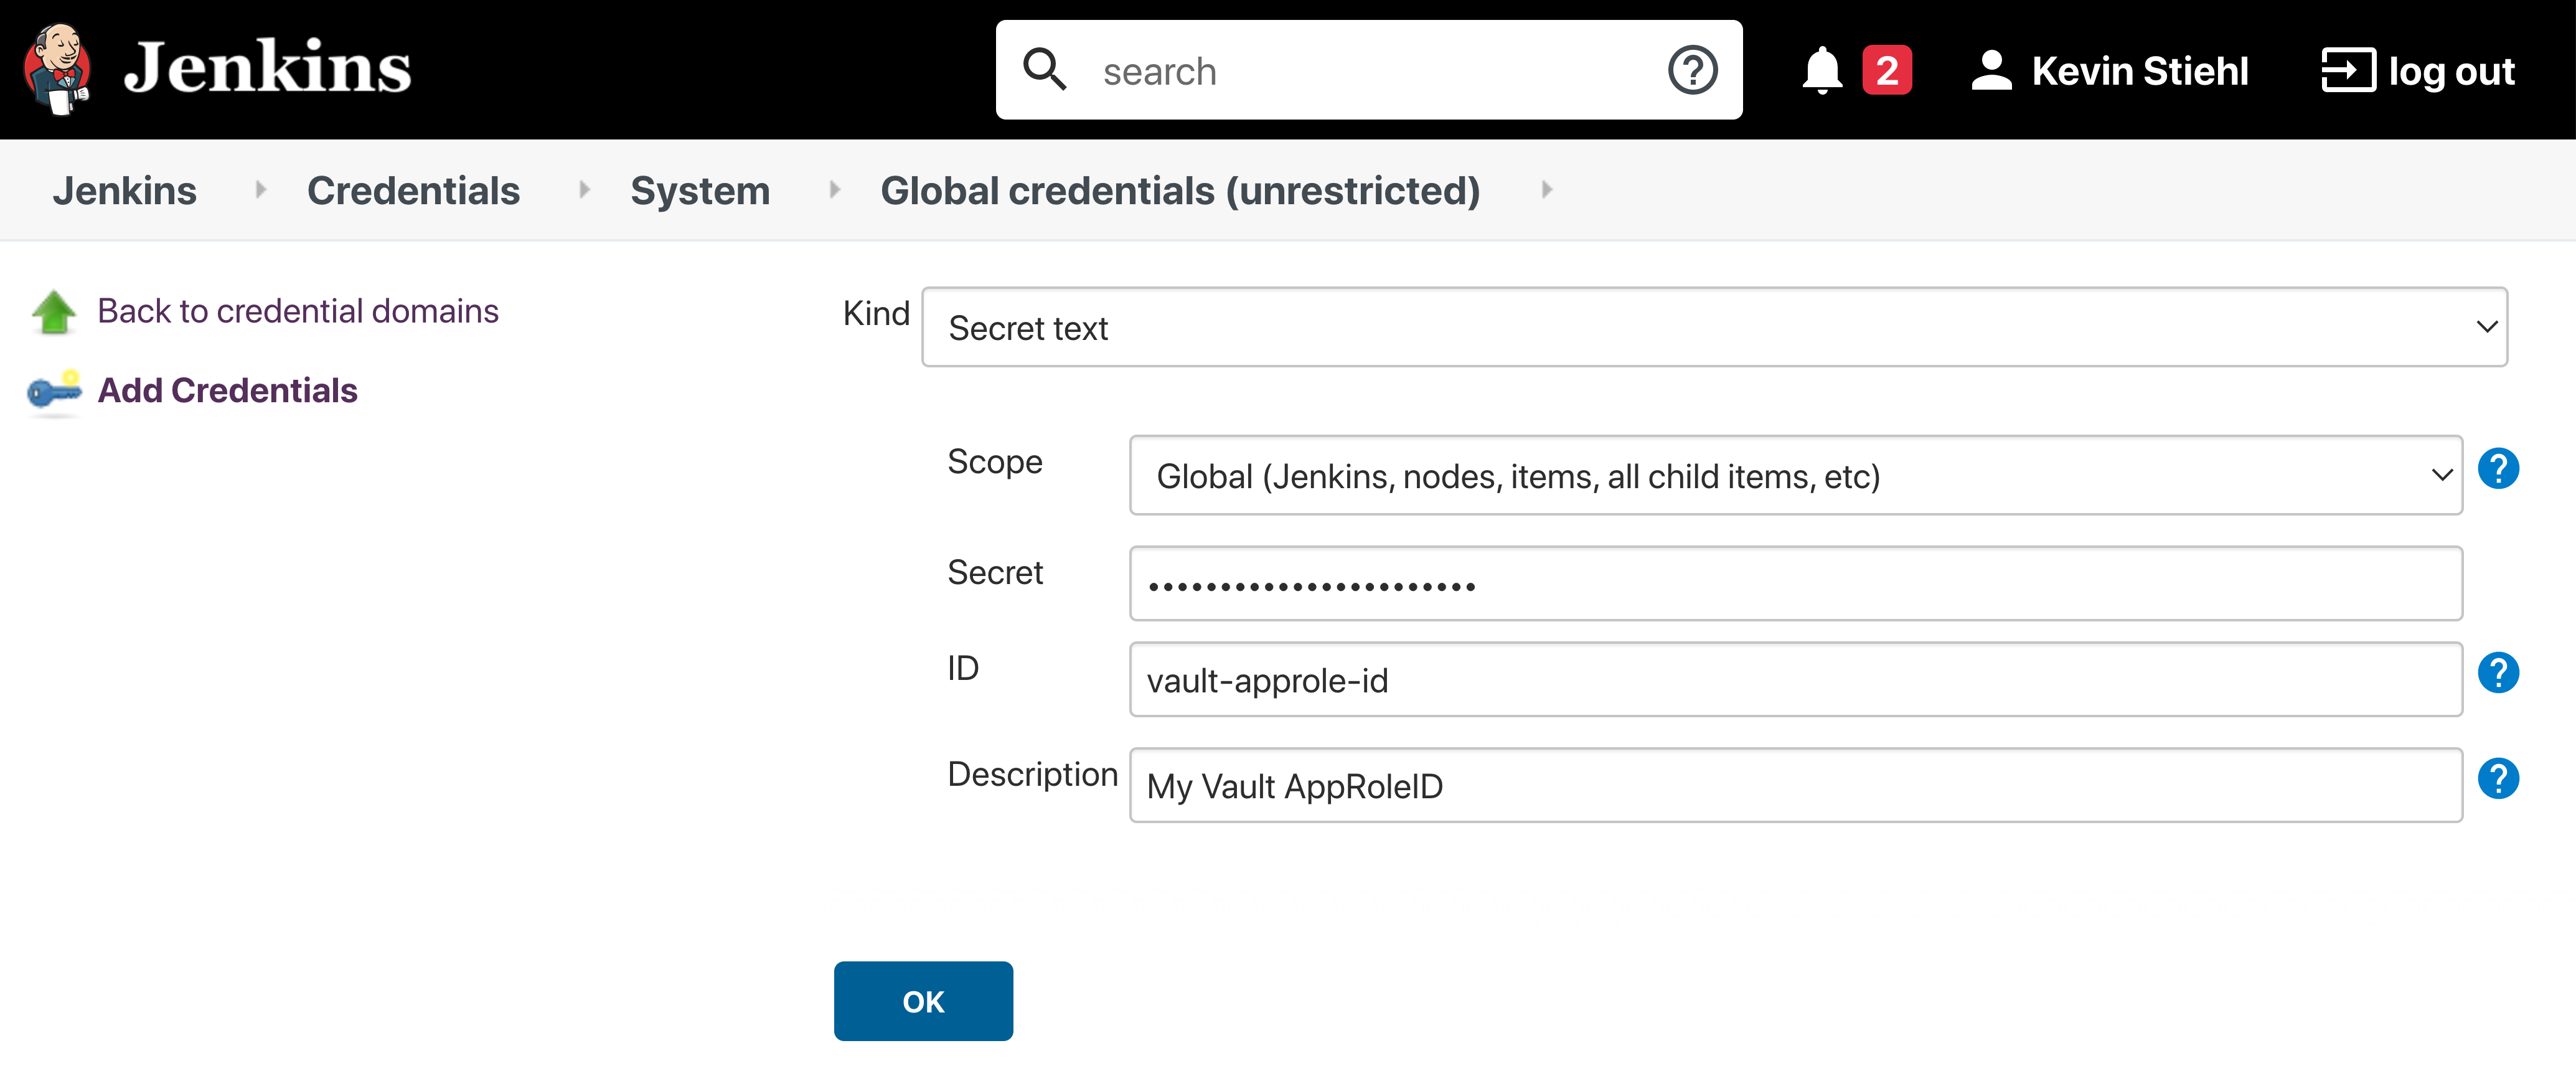 Create two jenkins secret text credentials